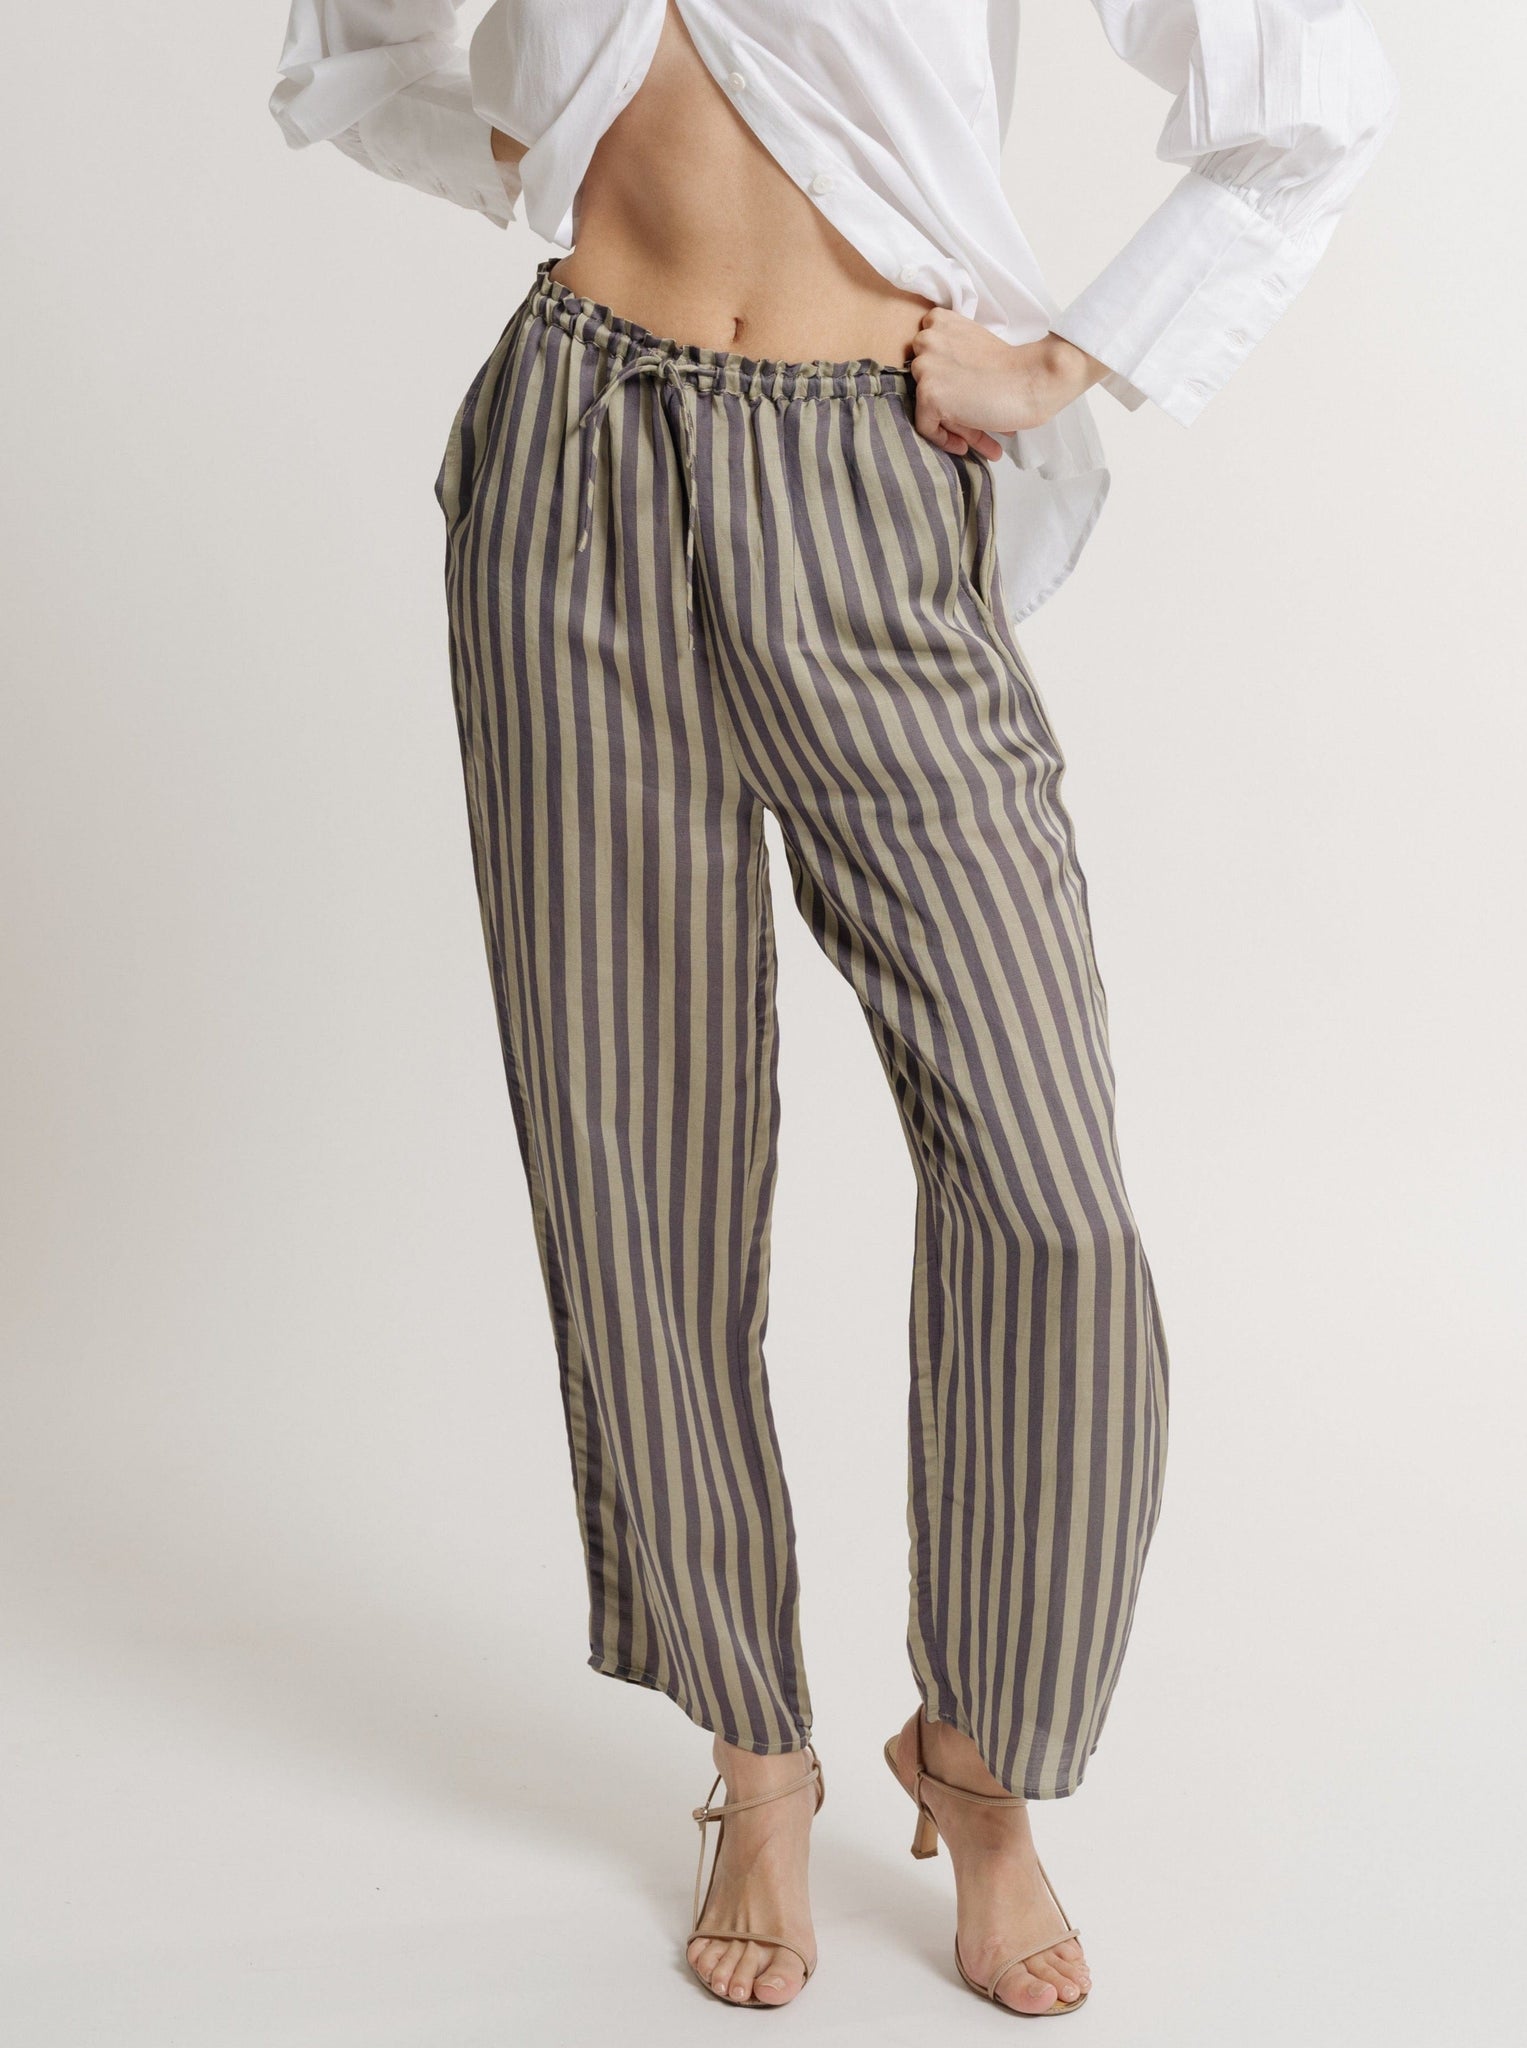 The model is wearing a white shirt and the Urban Stripe - Pre-order Cropped Ruffled Waist Tie Pant.